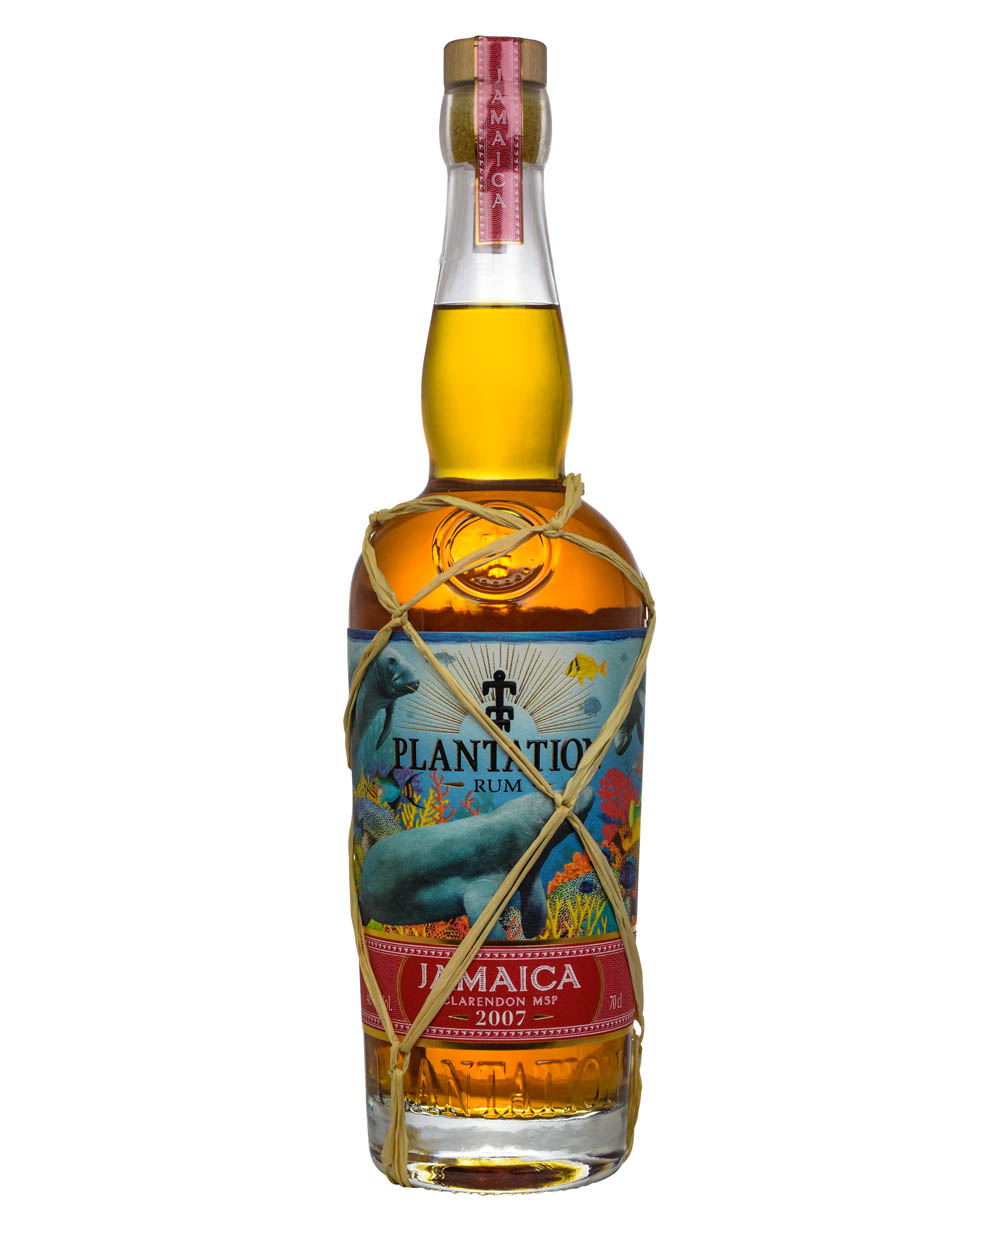 Plantation Rum 15 Years Old Jamaica 2007 Cask #28 Must Have Malts MHM